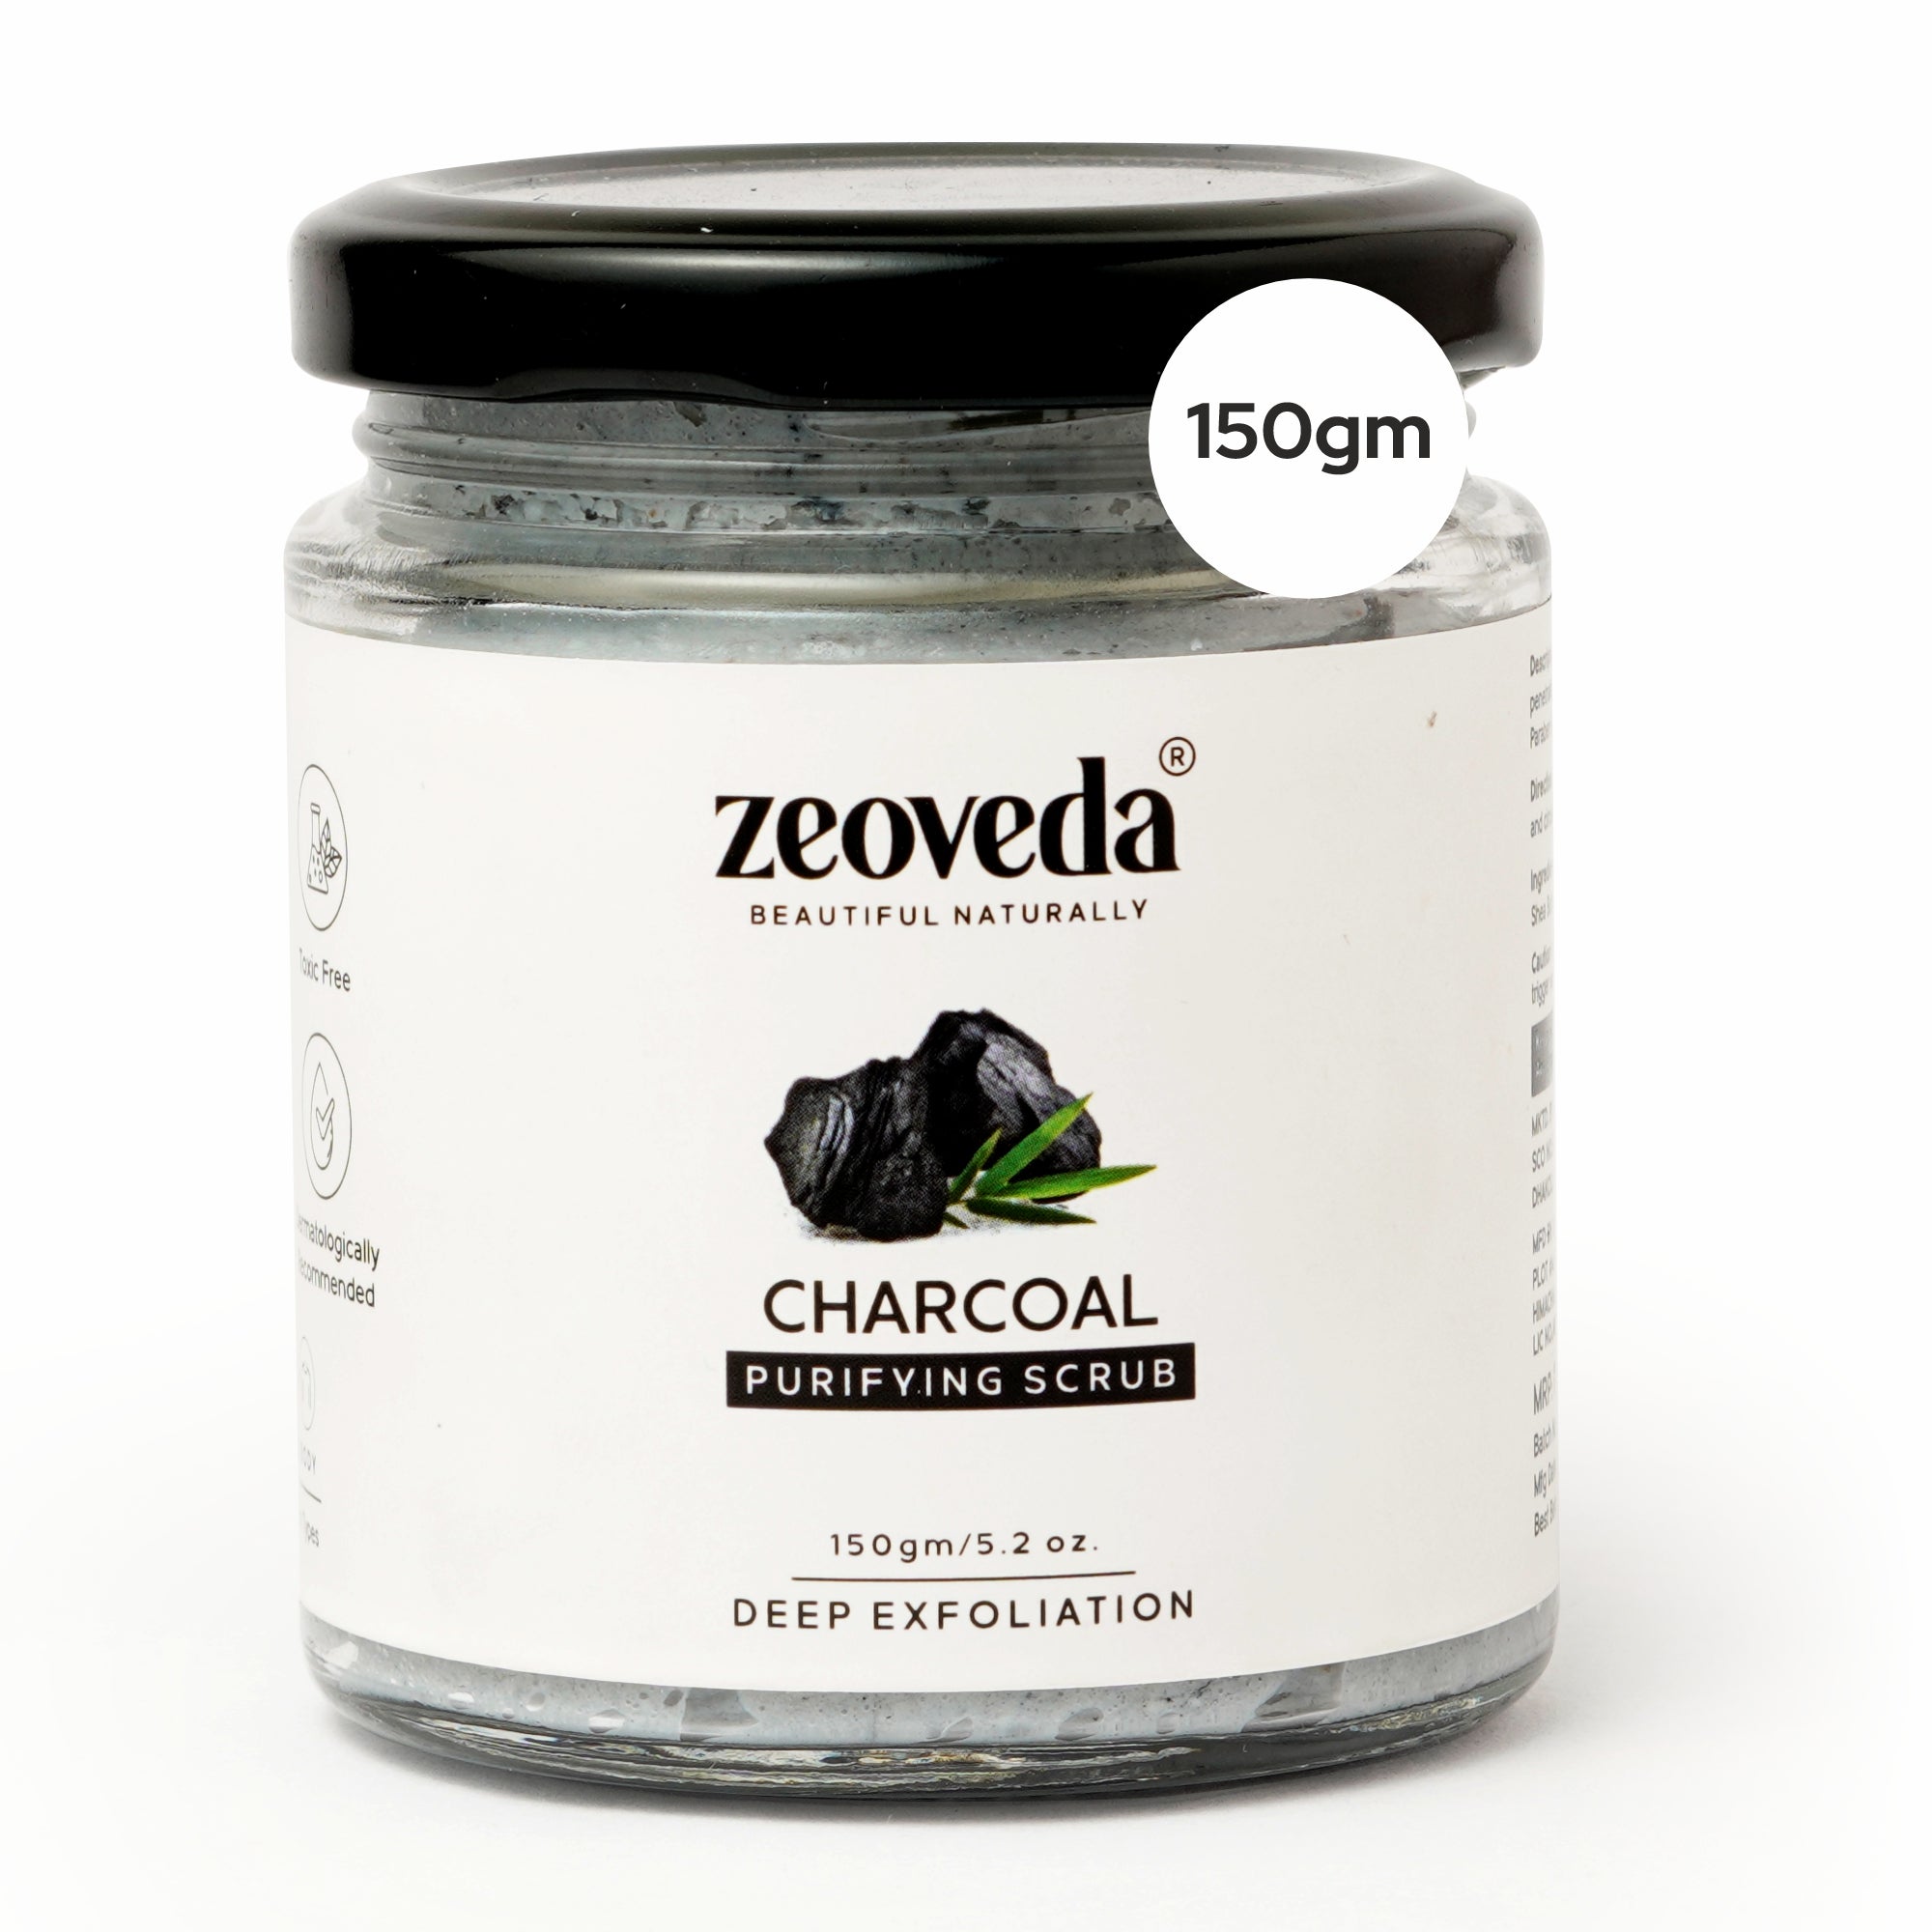 Charcoal Face And Body Scrub With Walnut Granules For Deep Cleansing & Exfoliation (150GM)